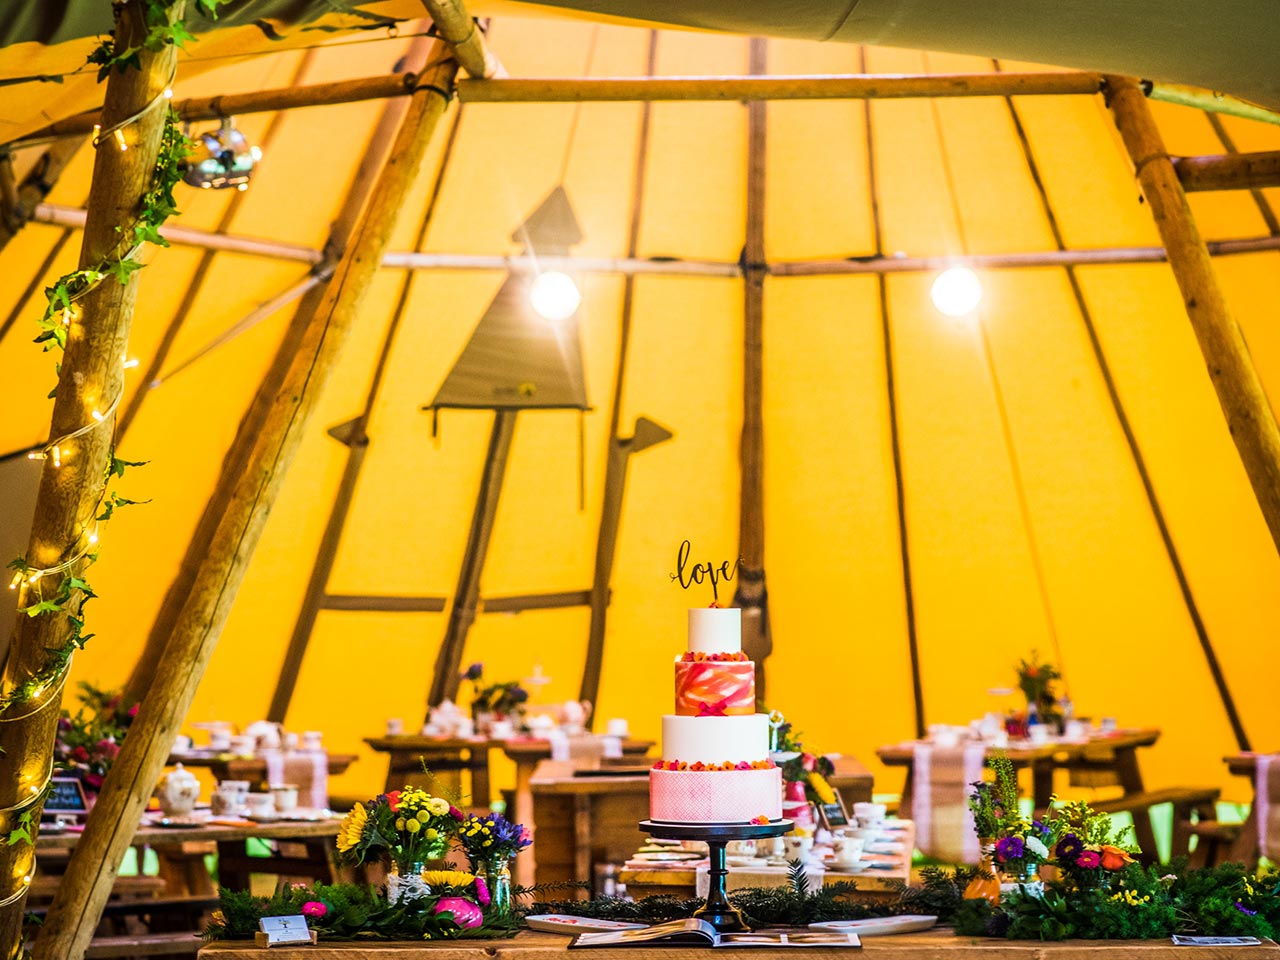 About Us - Magical Events in a Tipi